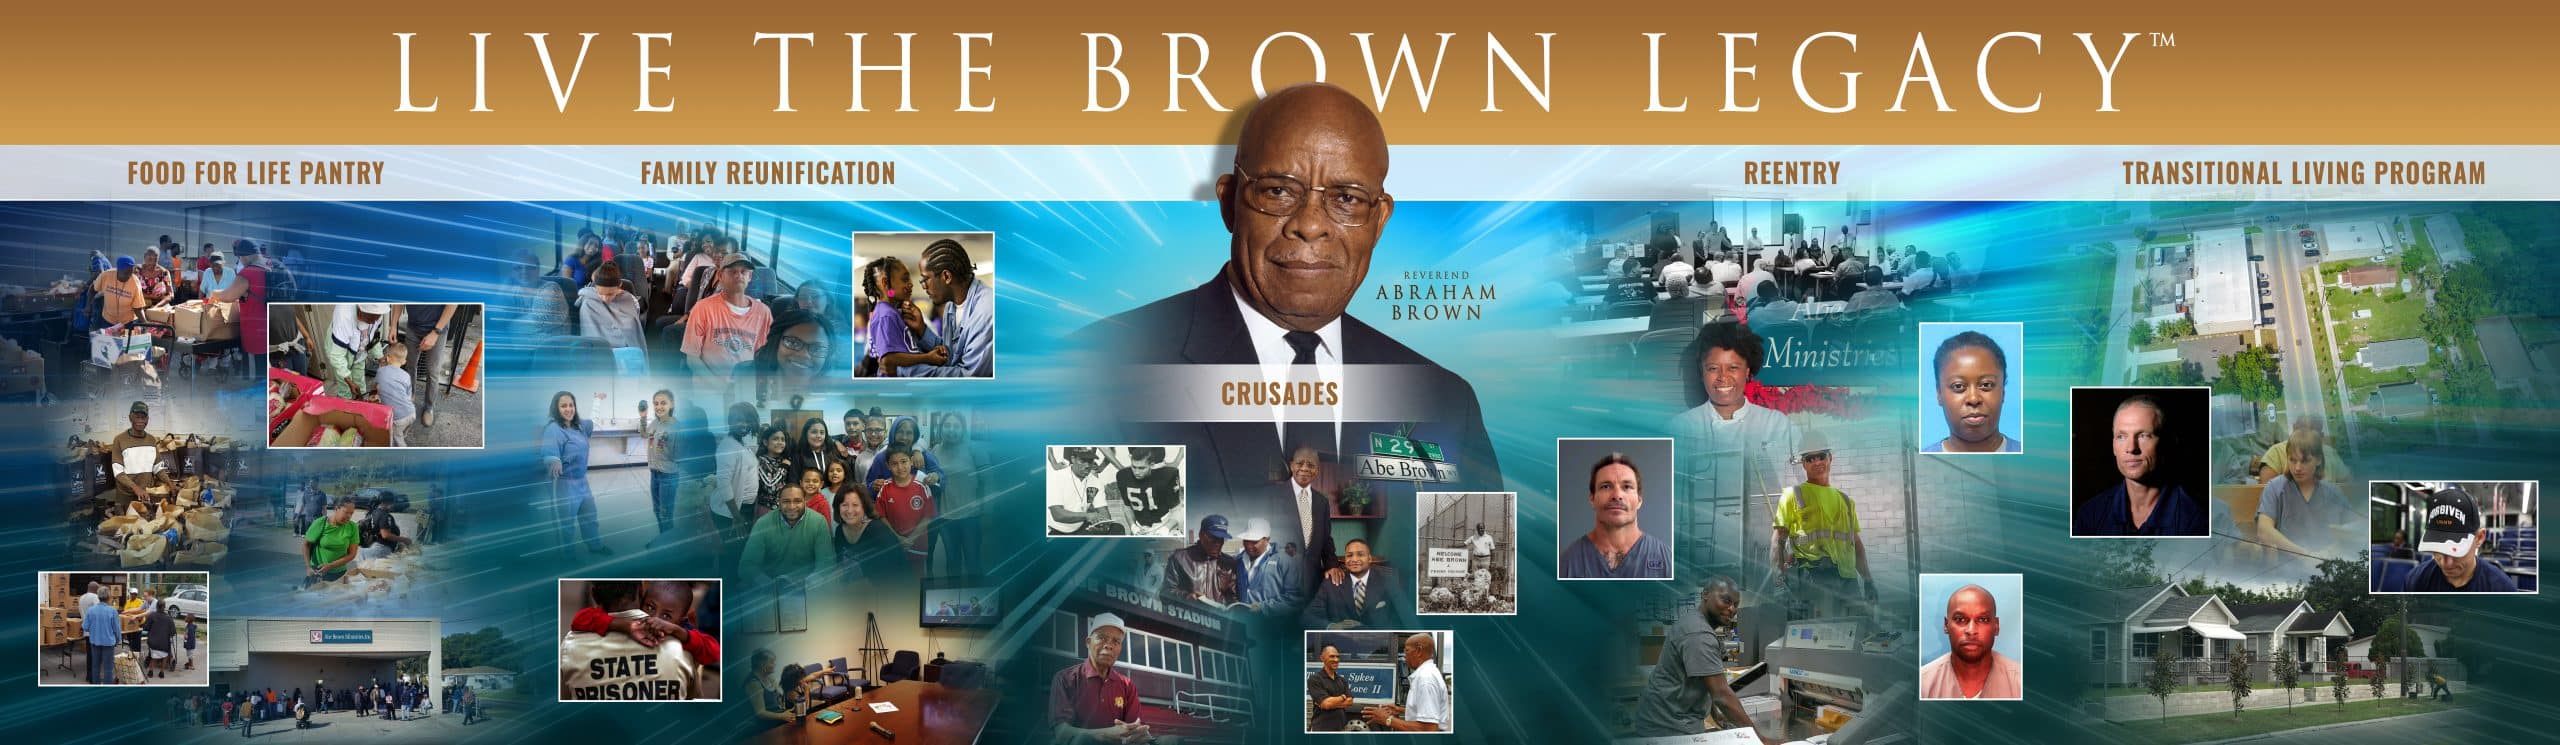 A collage of images with LIVE THE BROWN LEGACY